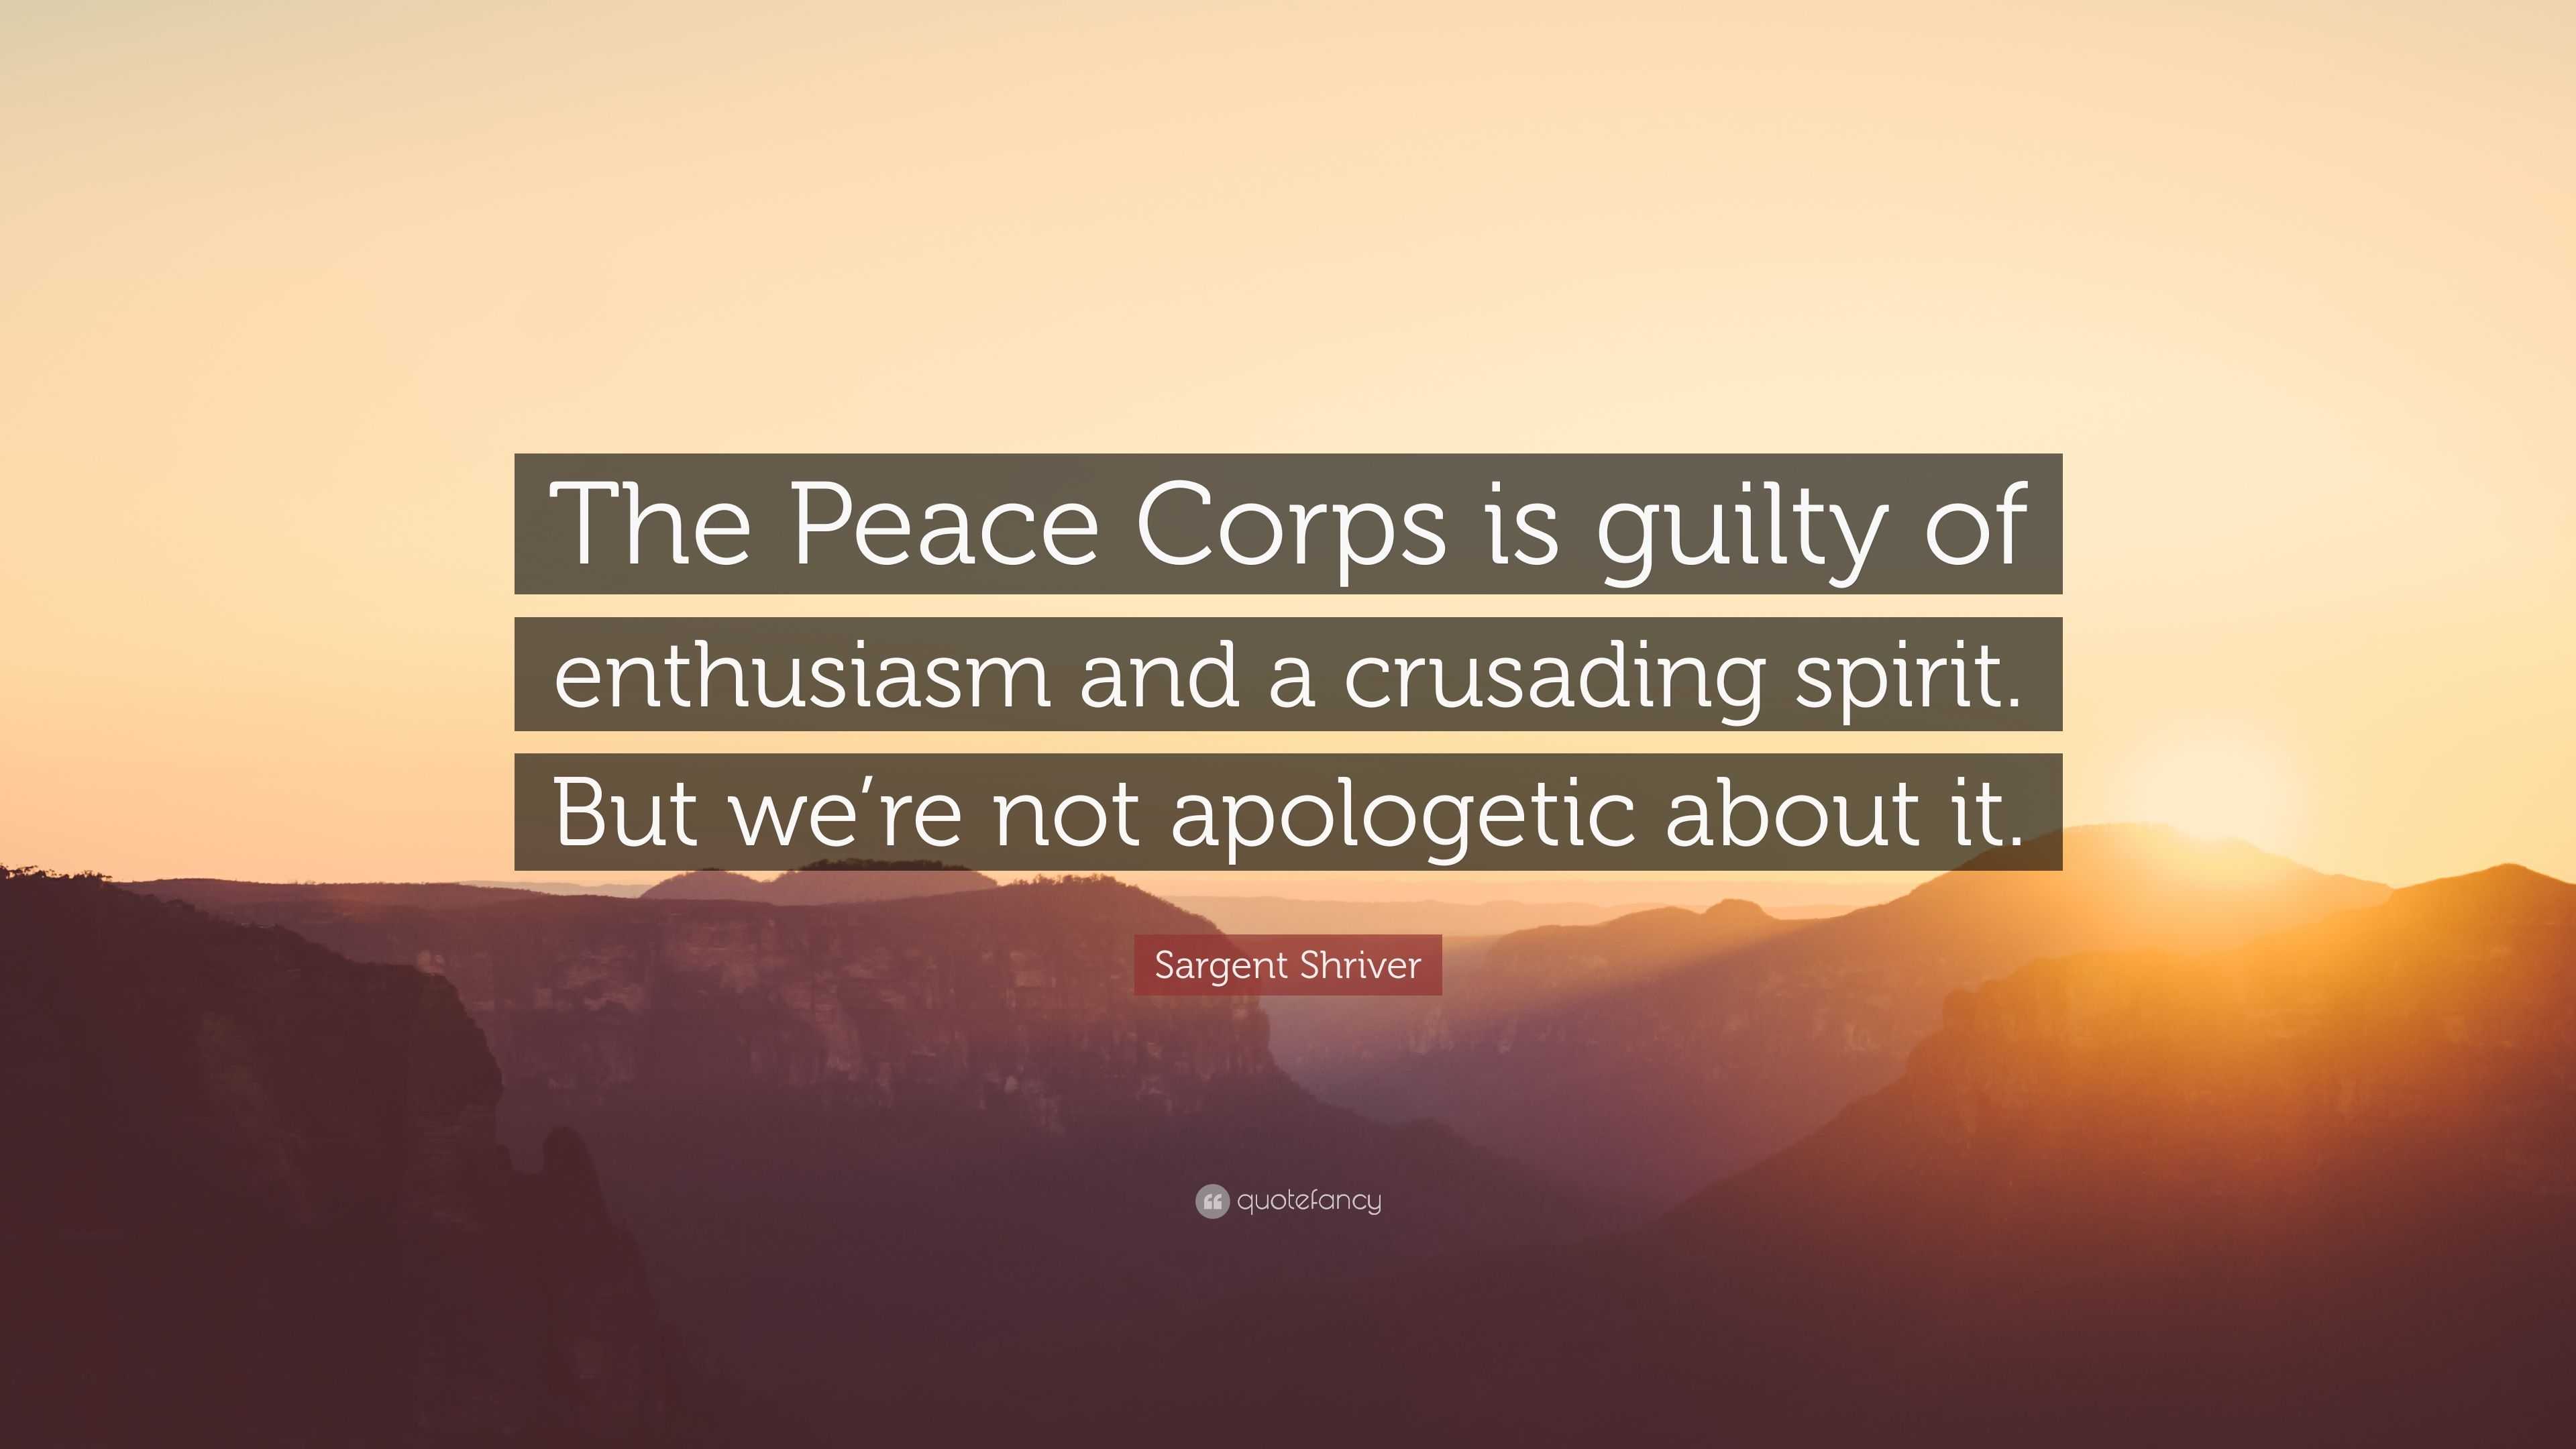 Sargent Shriver Quote: “The Peace Corps is guilty of enthusiasm and a